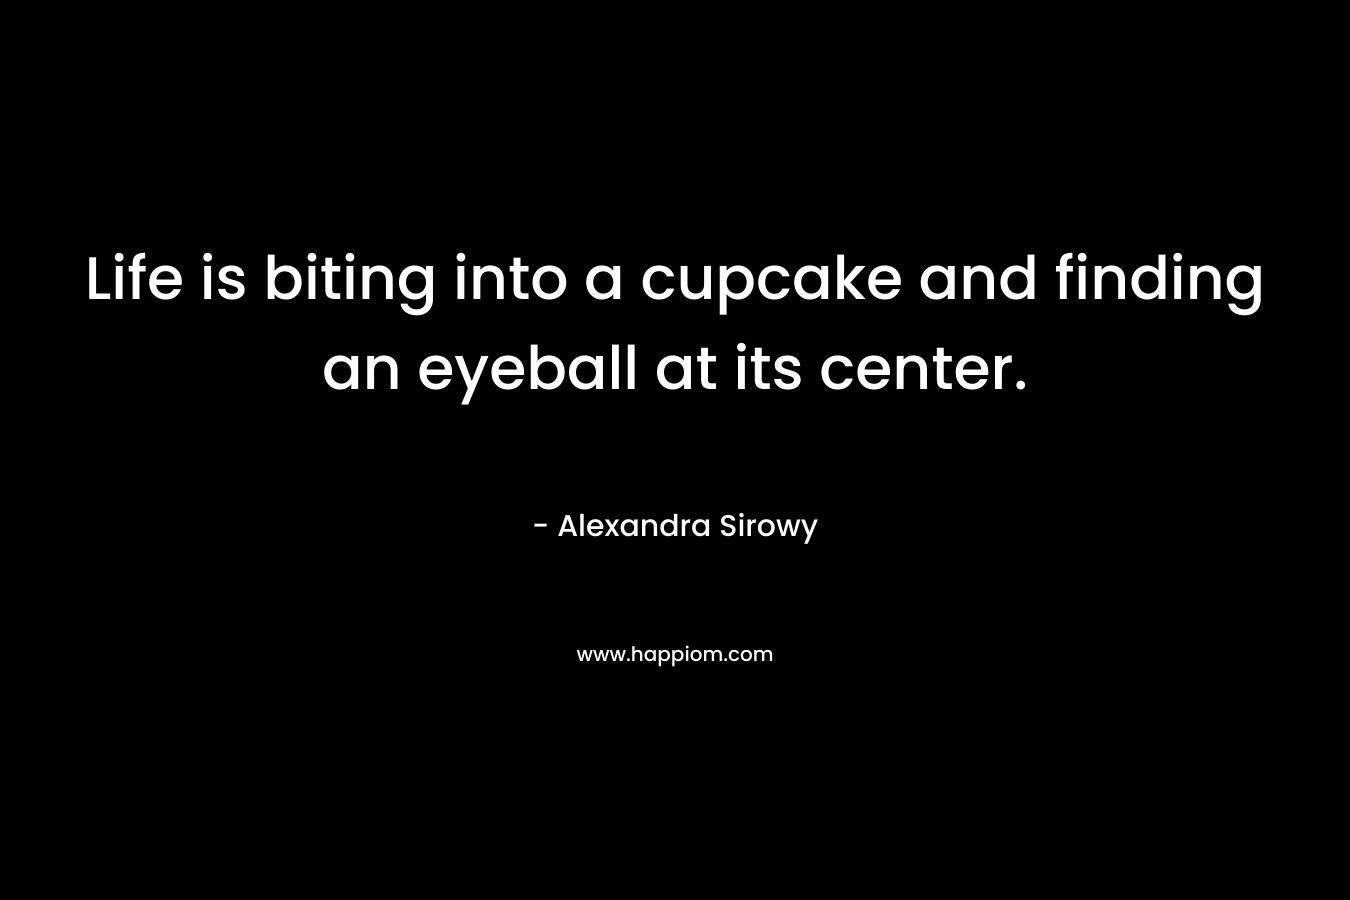 Life is biting into a cupcake and finding an eyeball at its center. – Alexandra Sirowy